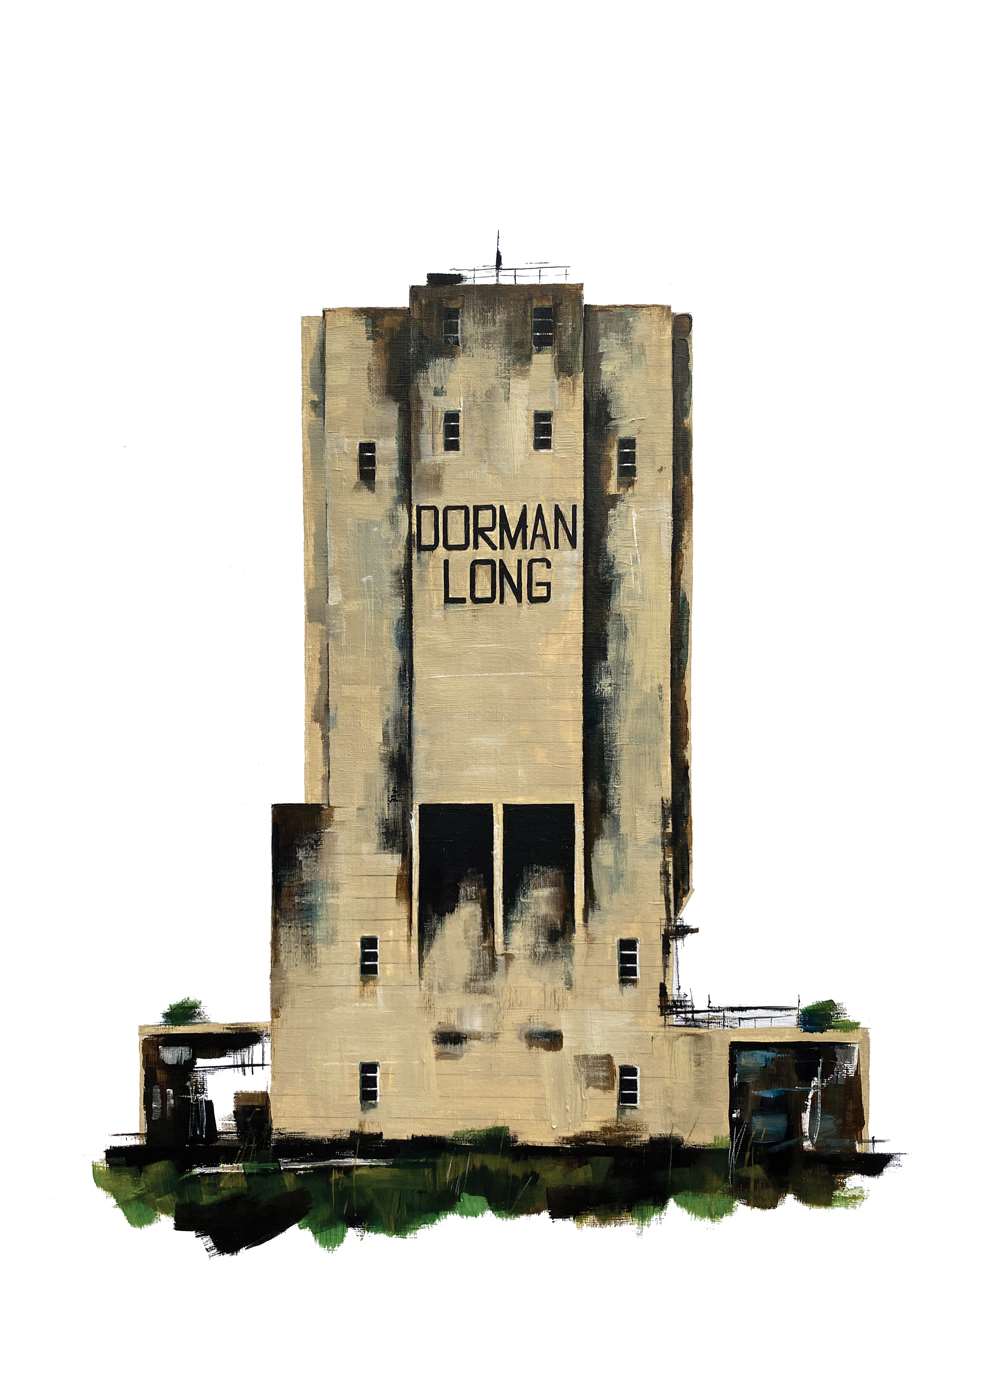 Nick Coupland, Mixed Media architectural illustration of the Dorman long tower. Pen and ink combined with collage to create a striking bold image. 